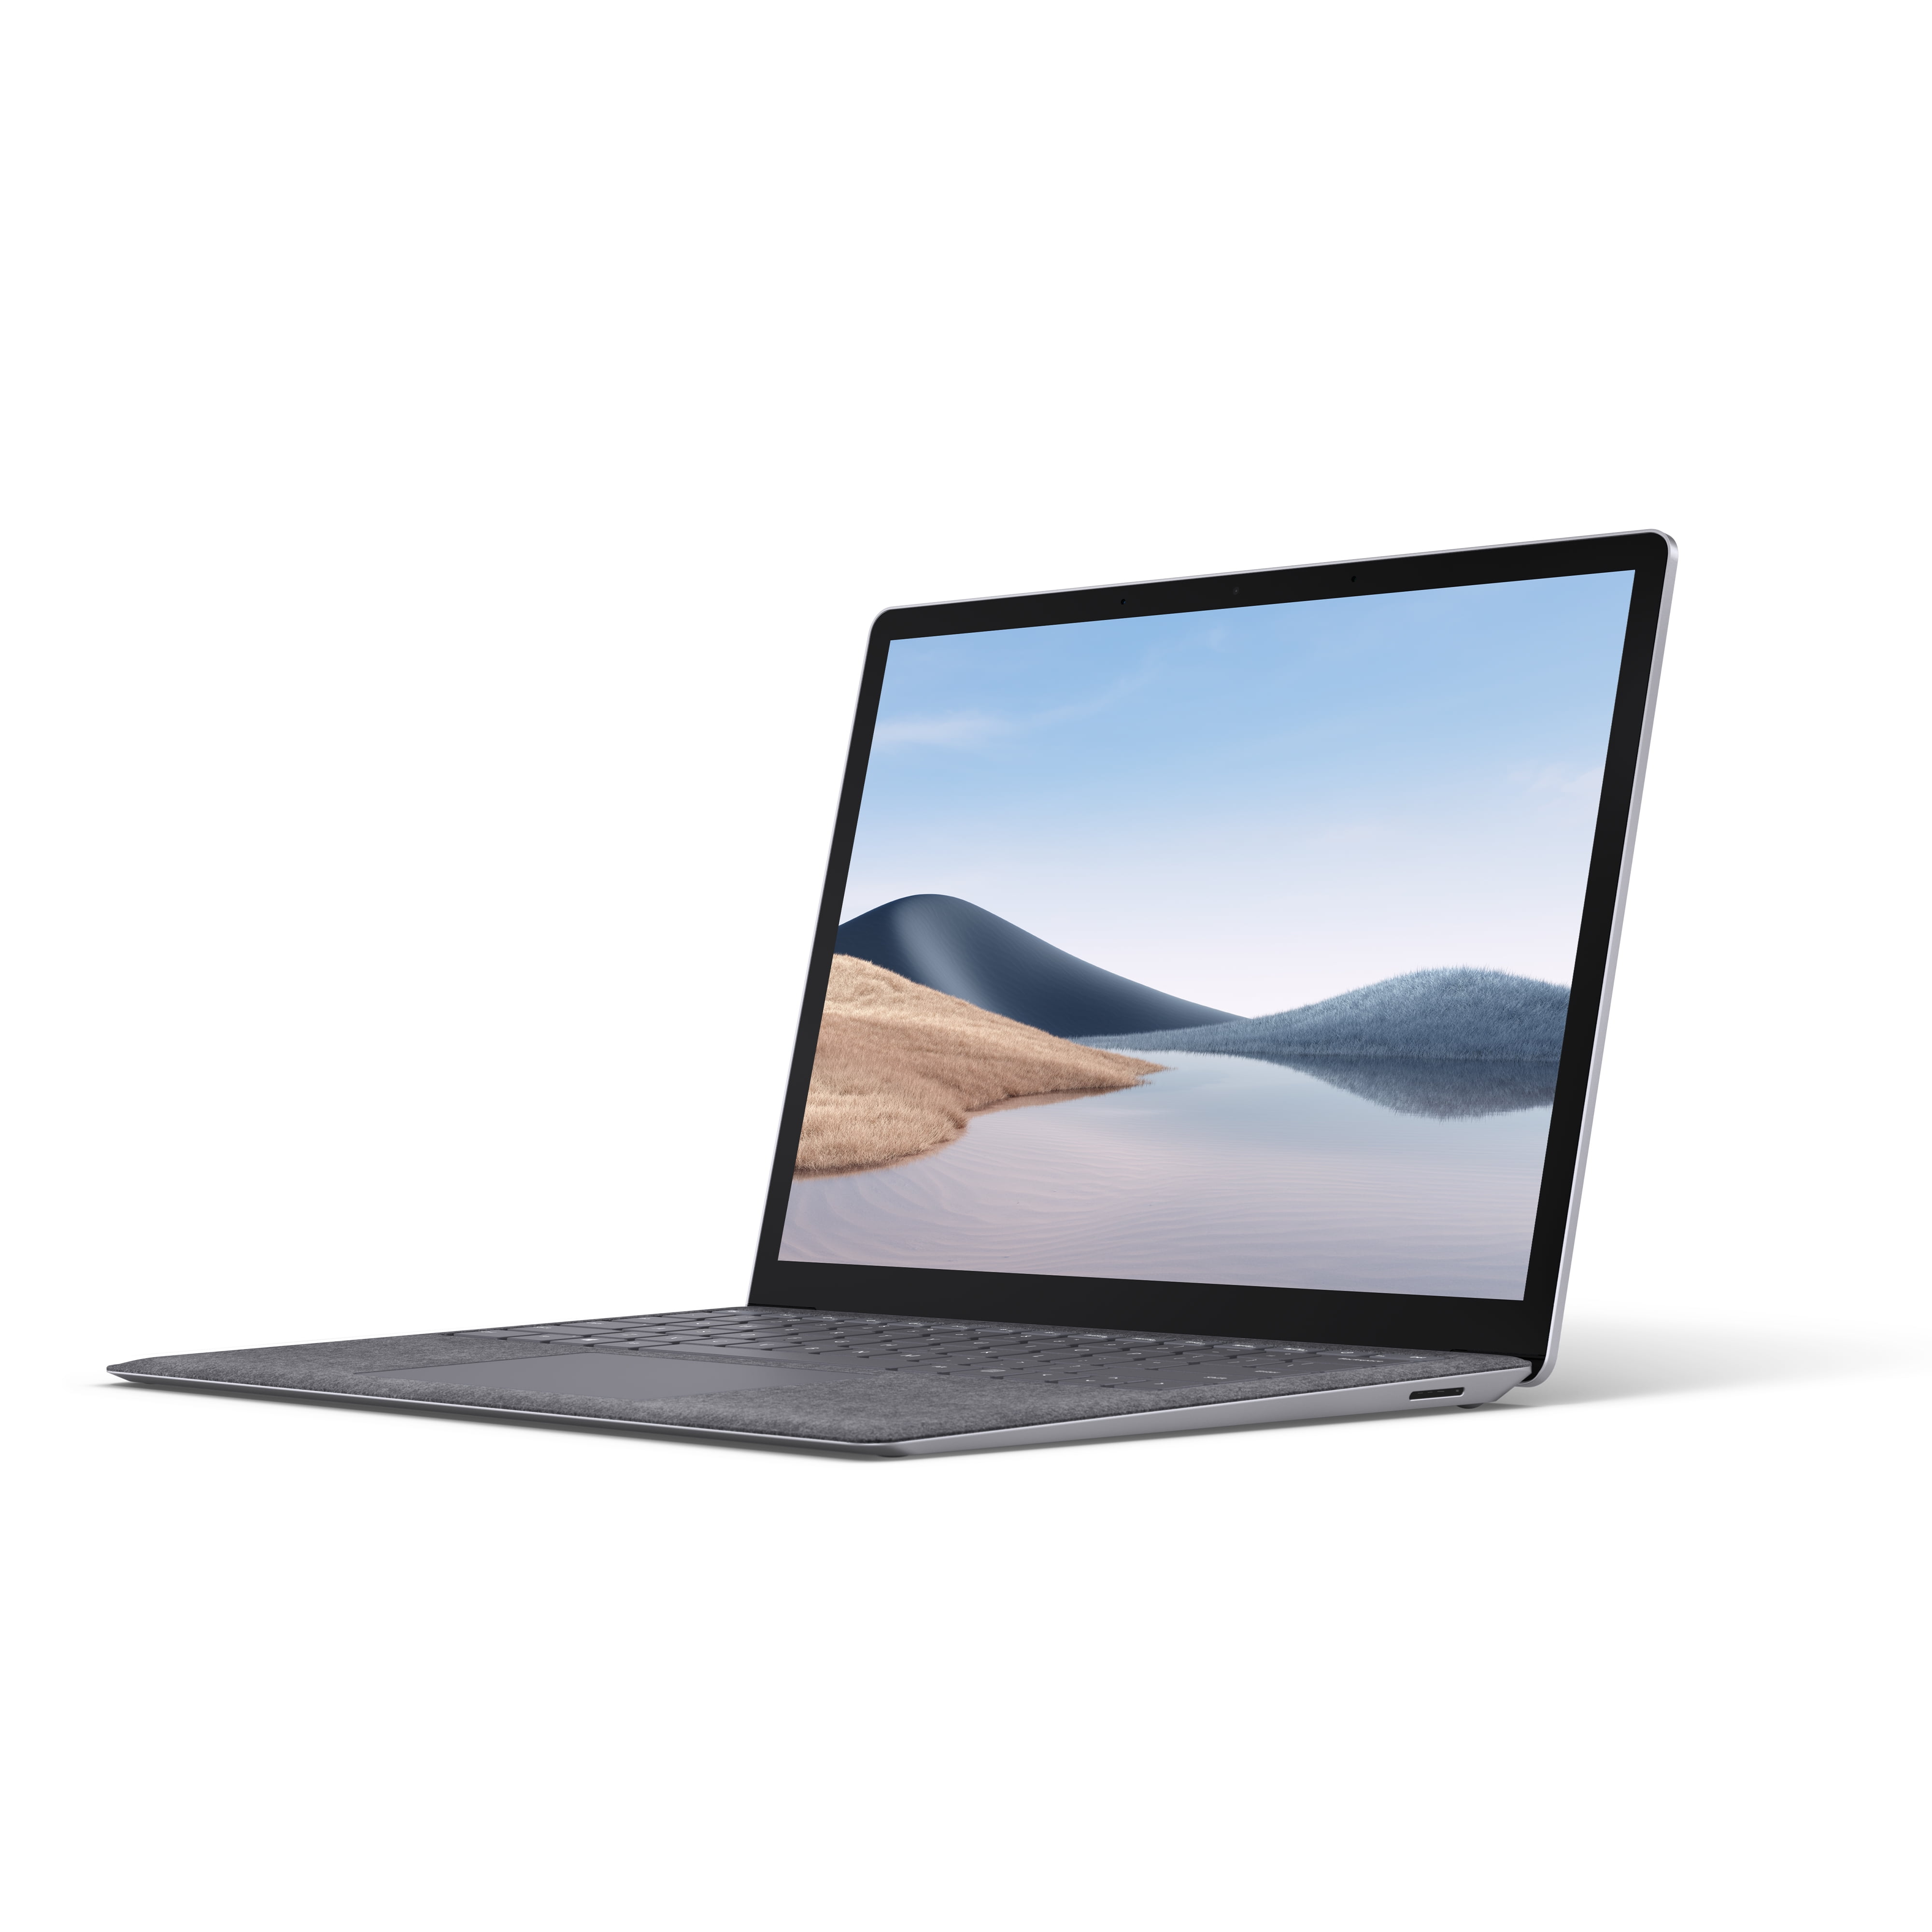 Microsoft - Surface Laptop 4 13.5” Touch-Screen – Intel Core i7 - 16GB -  512GB Solid State Drive (Latest Model) - Platinum